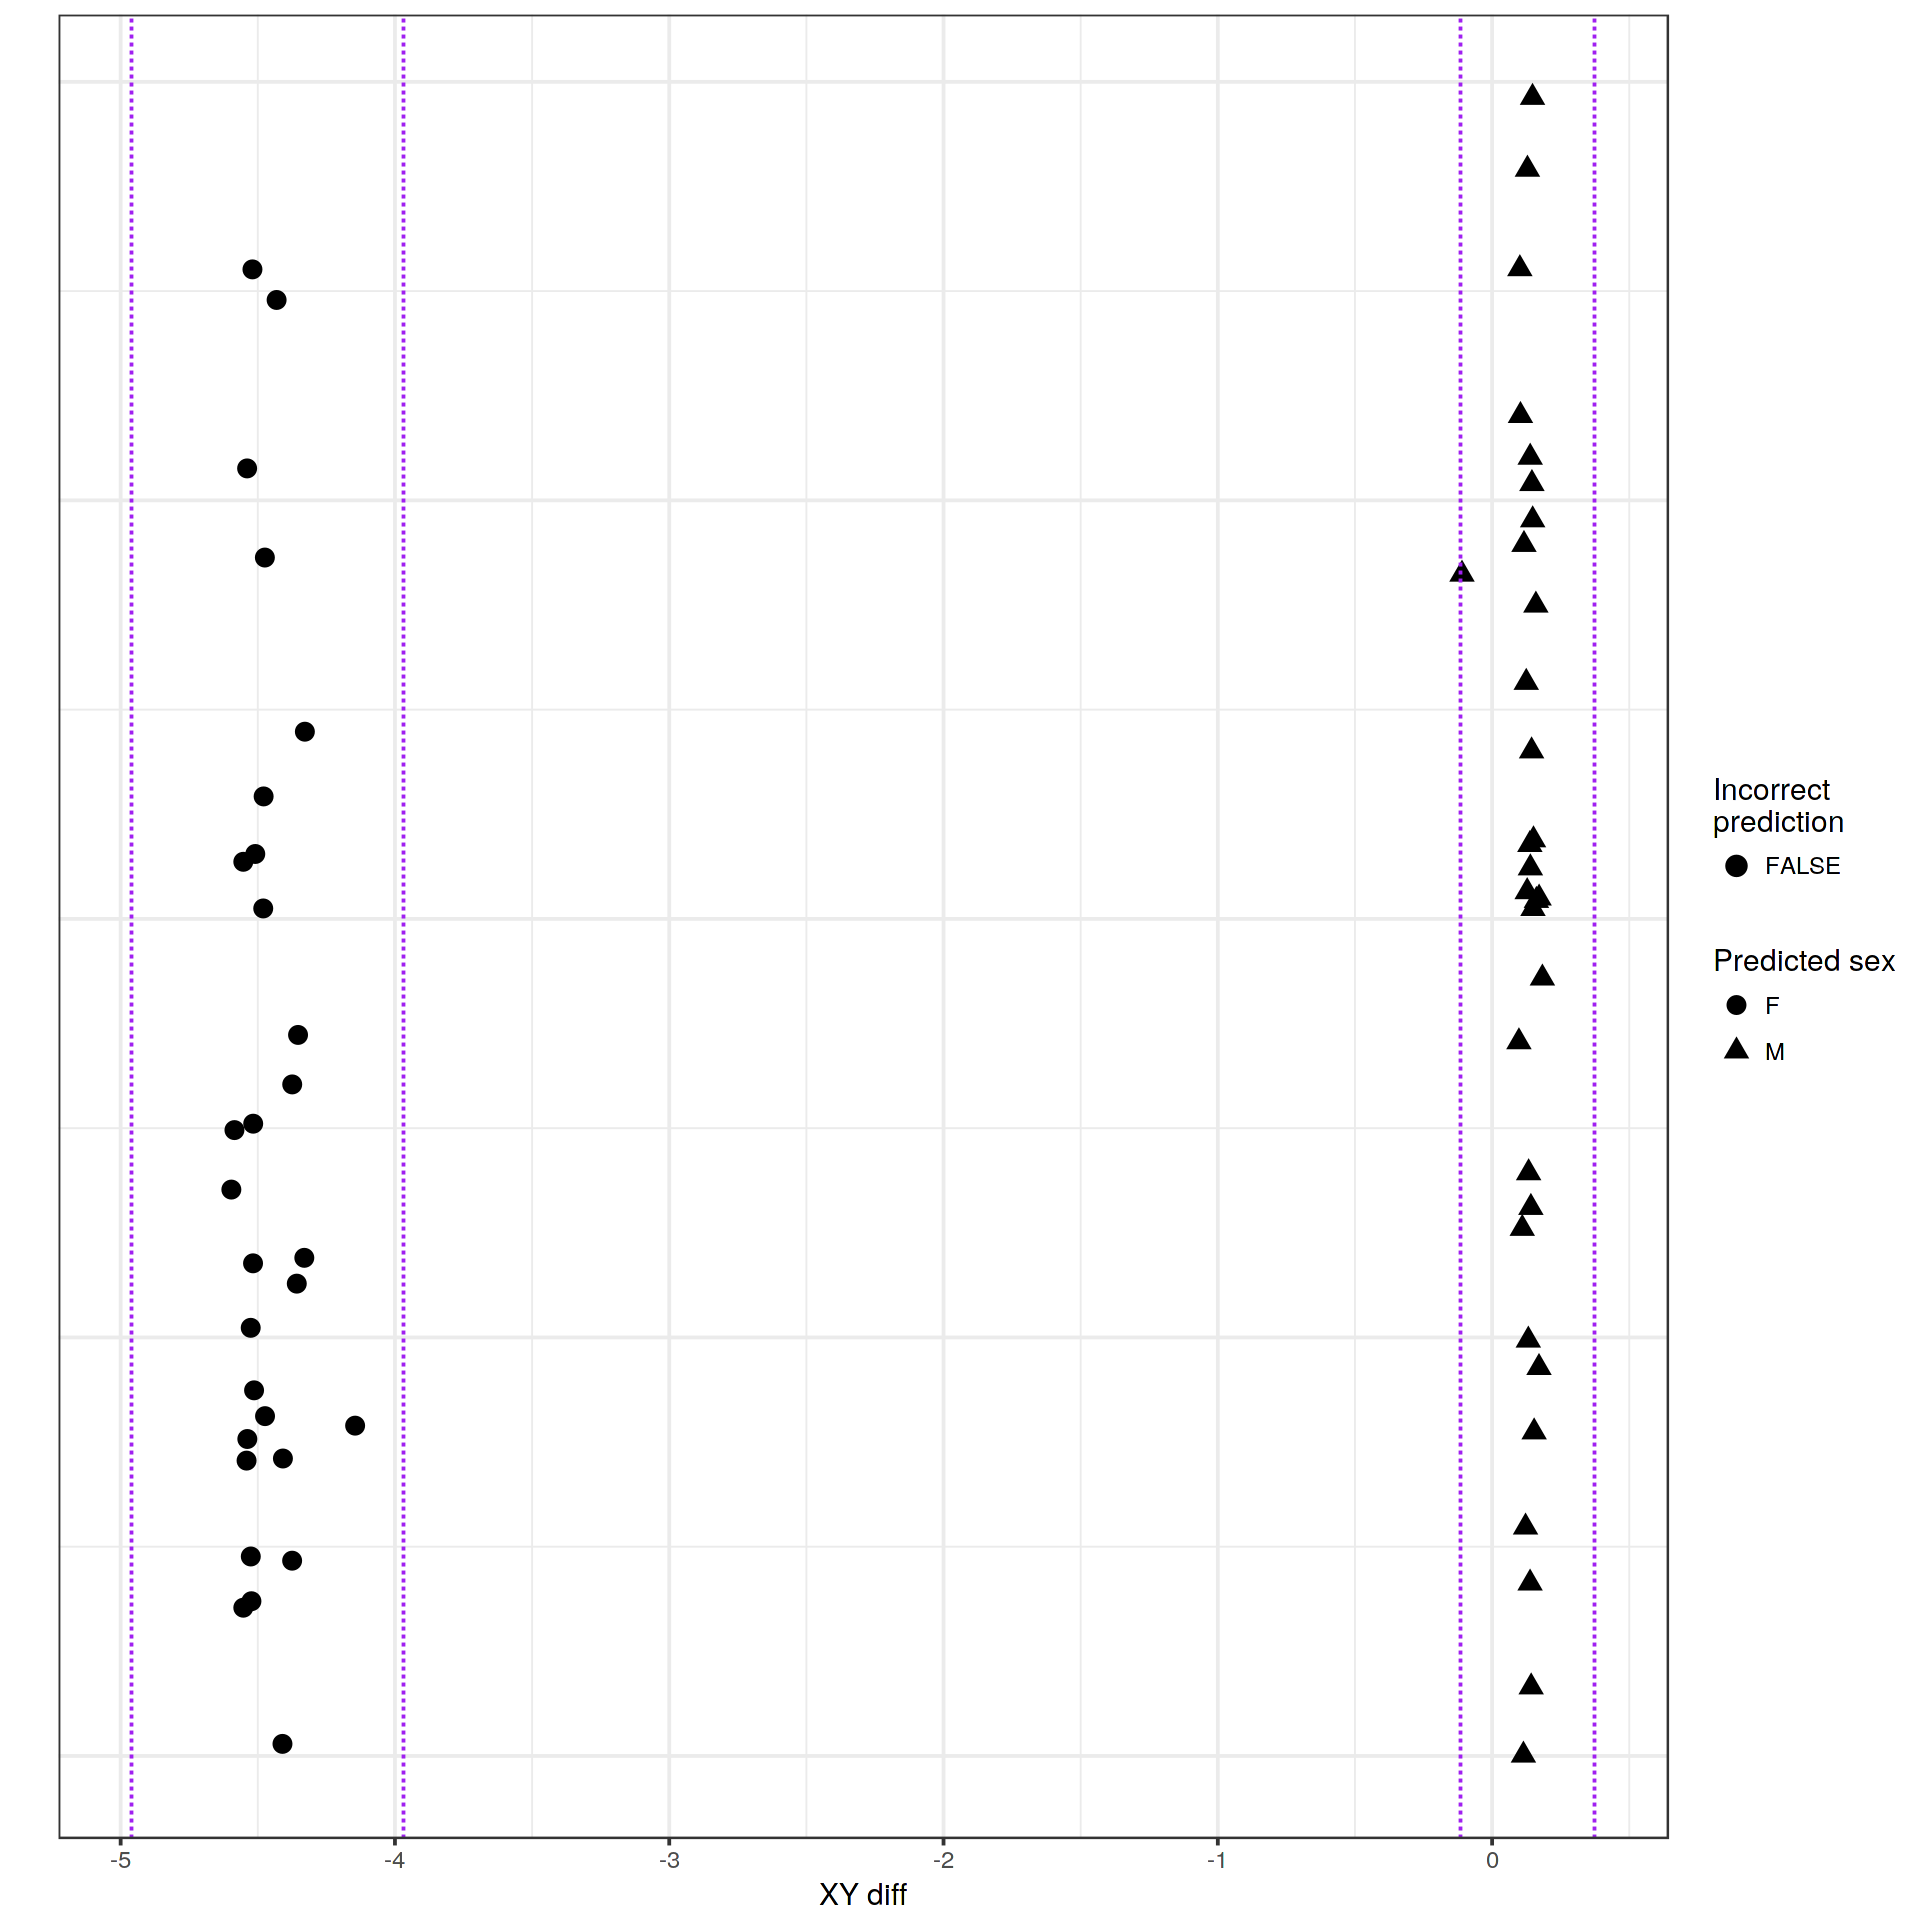 Predicted sex of each sample based on the sex chromosome copy numbers inferred from probe intensities for the 450k array data. No predicted sex values differ from their annotations. Plot generated by meffil QC report.